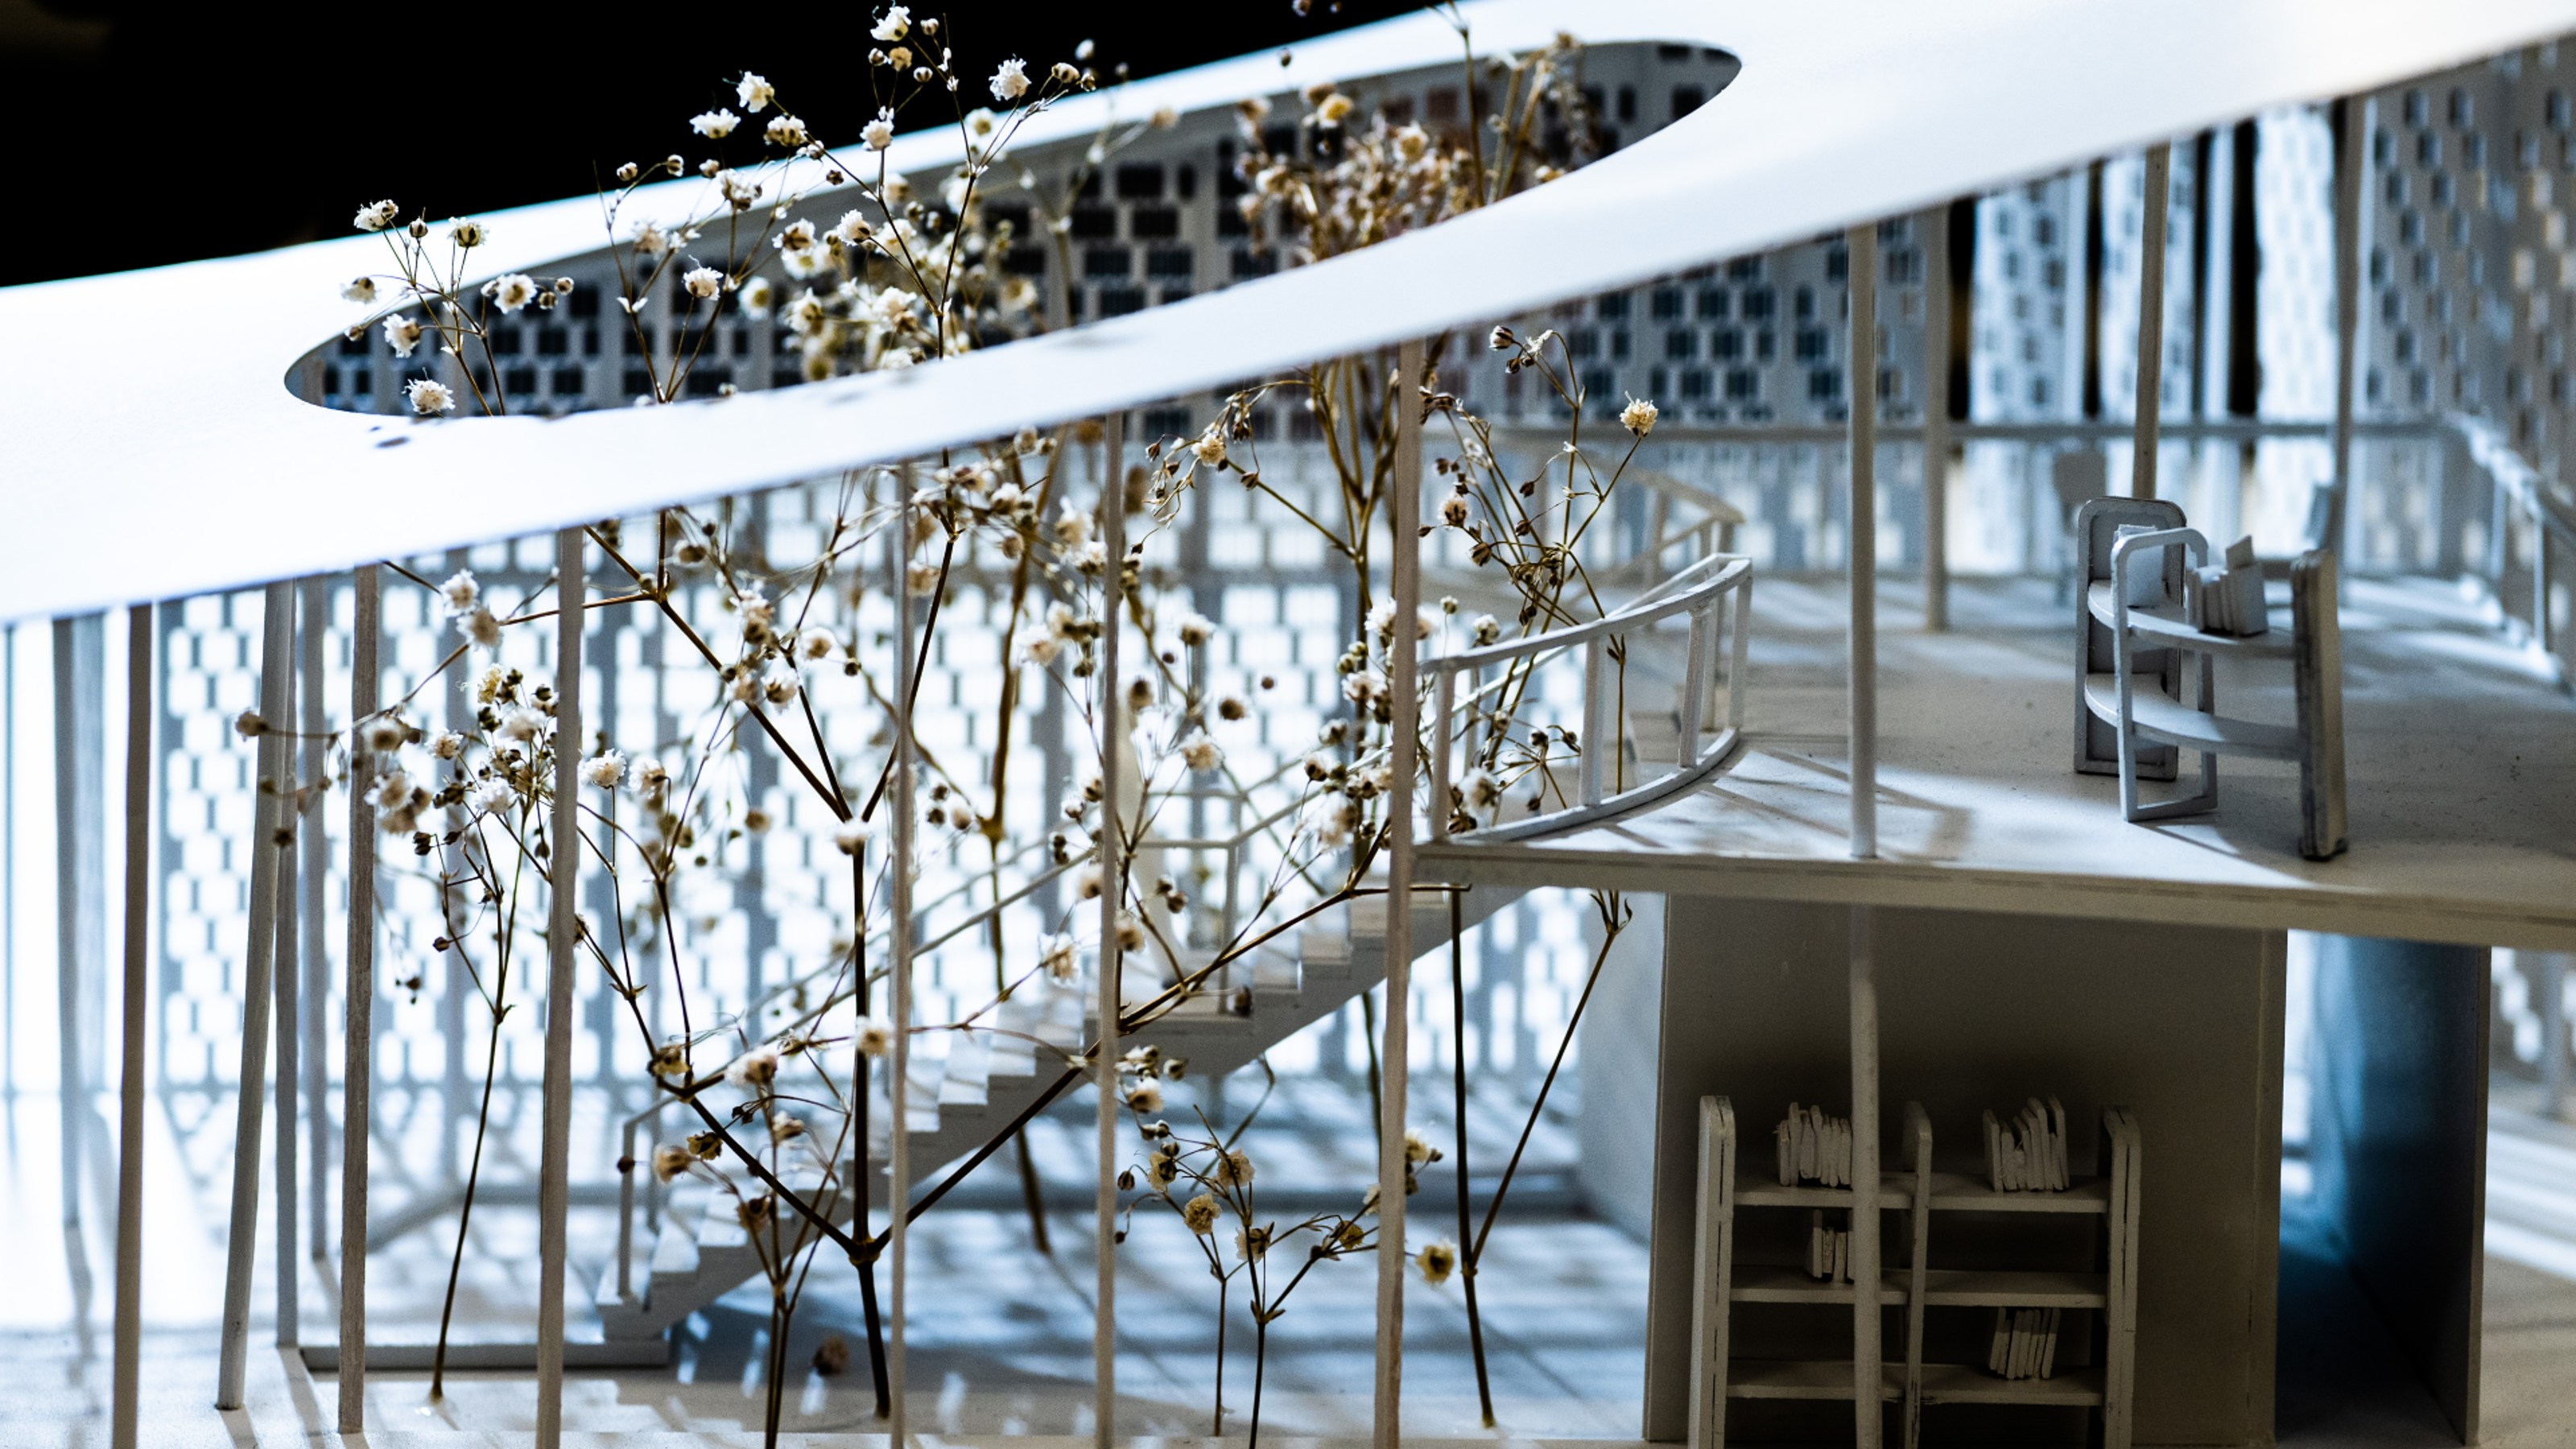 Close up view from outside of architectural model showing the side of the indoor staircase and a book shelf surrounded by trees